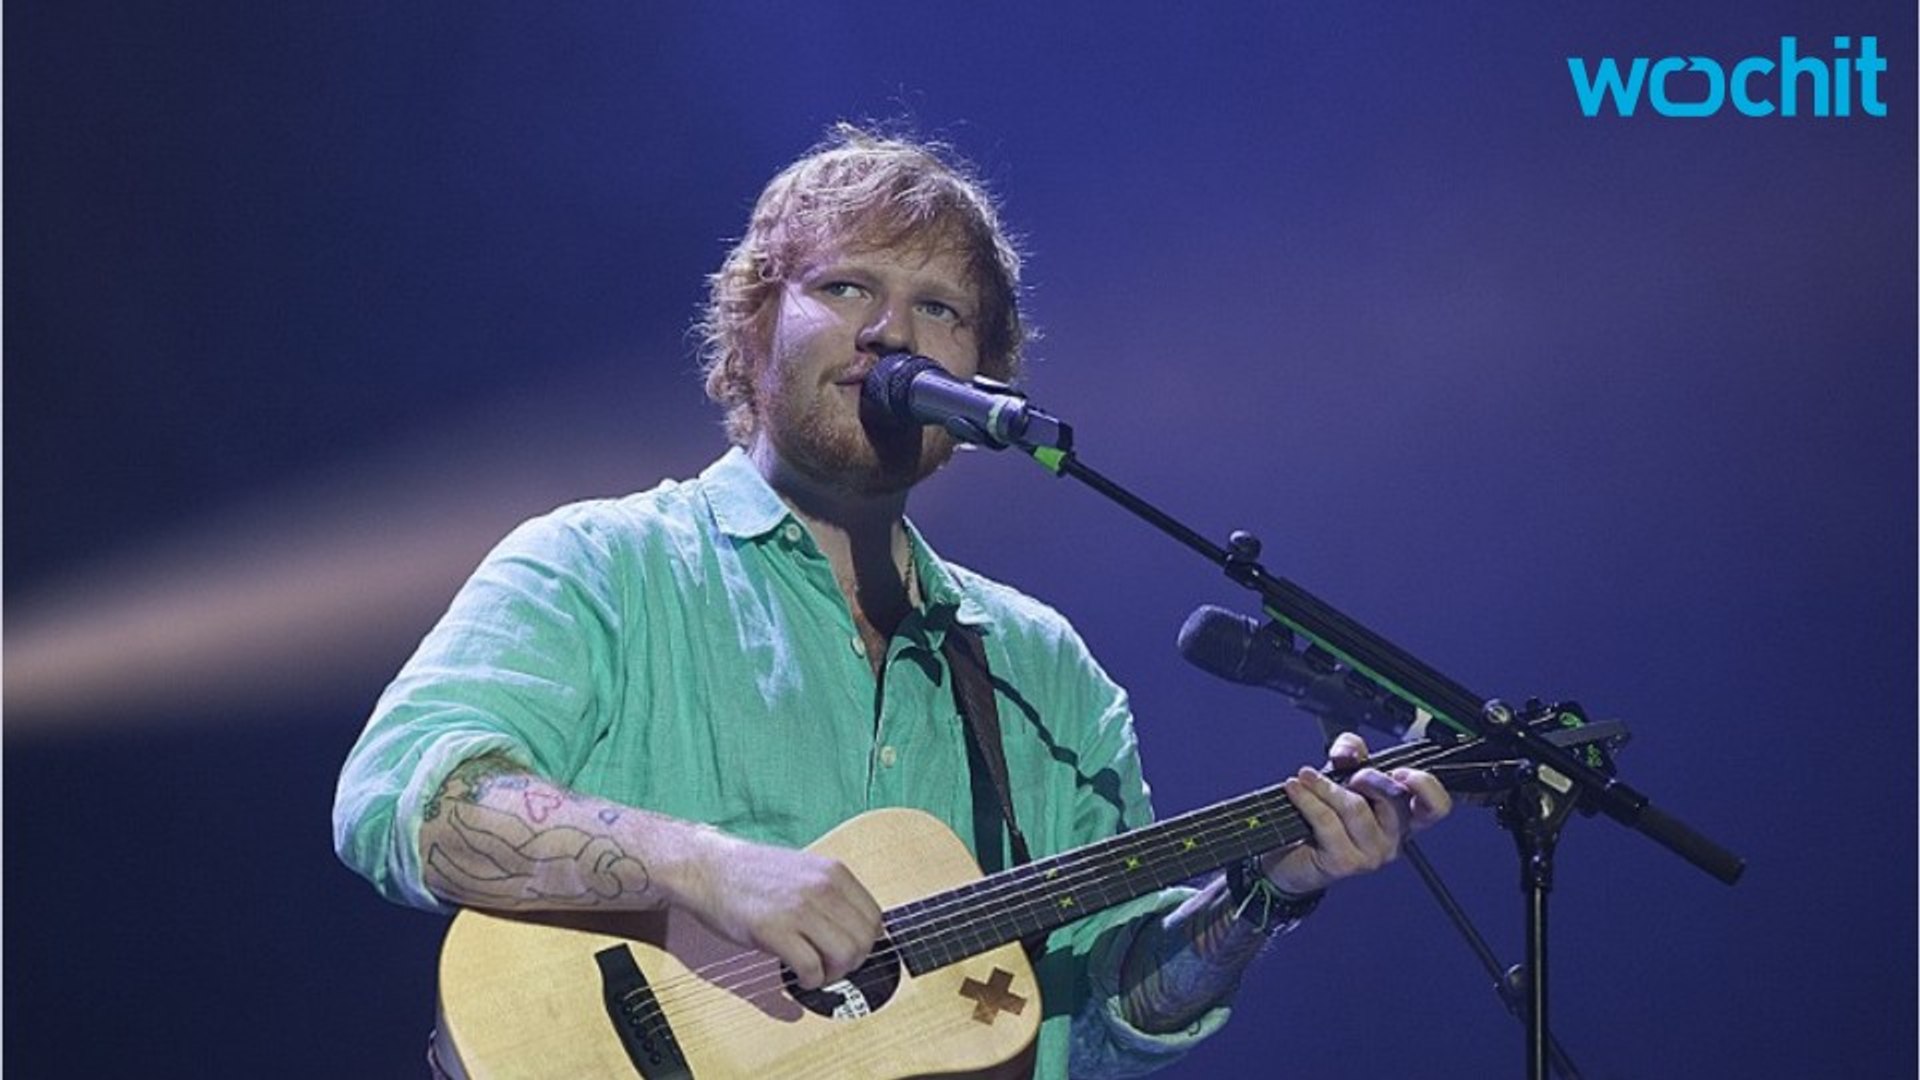 Picture This: Ed Sheeran May Have to Pay $20M For Ripping Off 'Photograph'